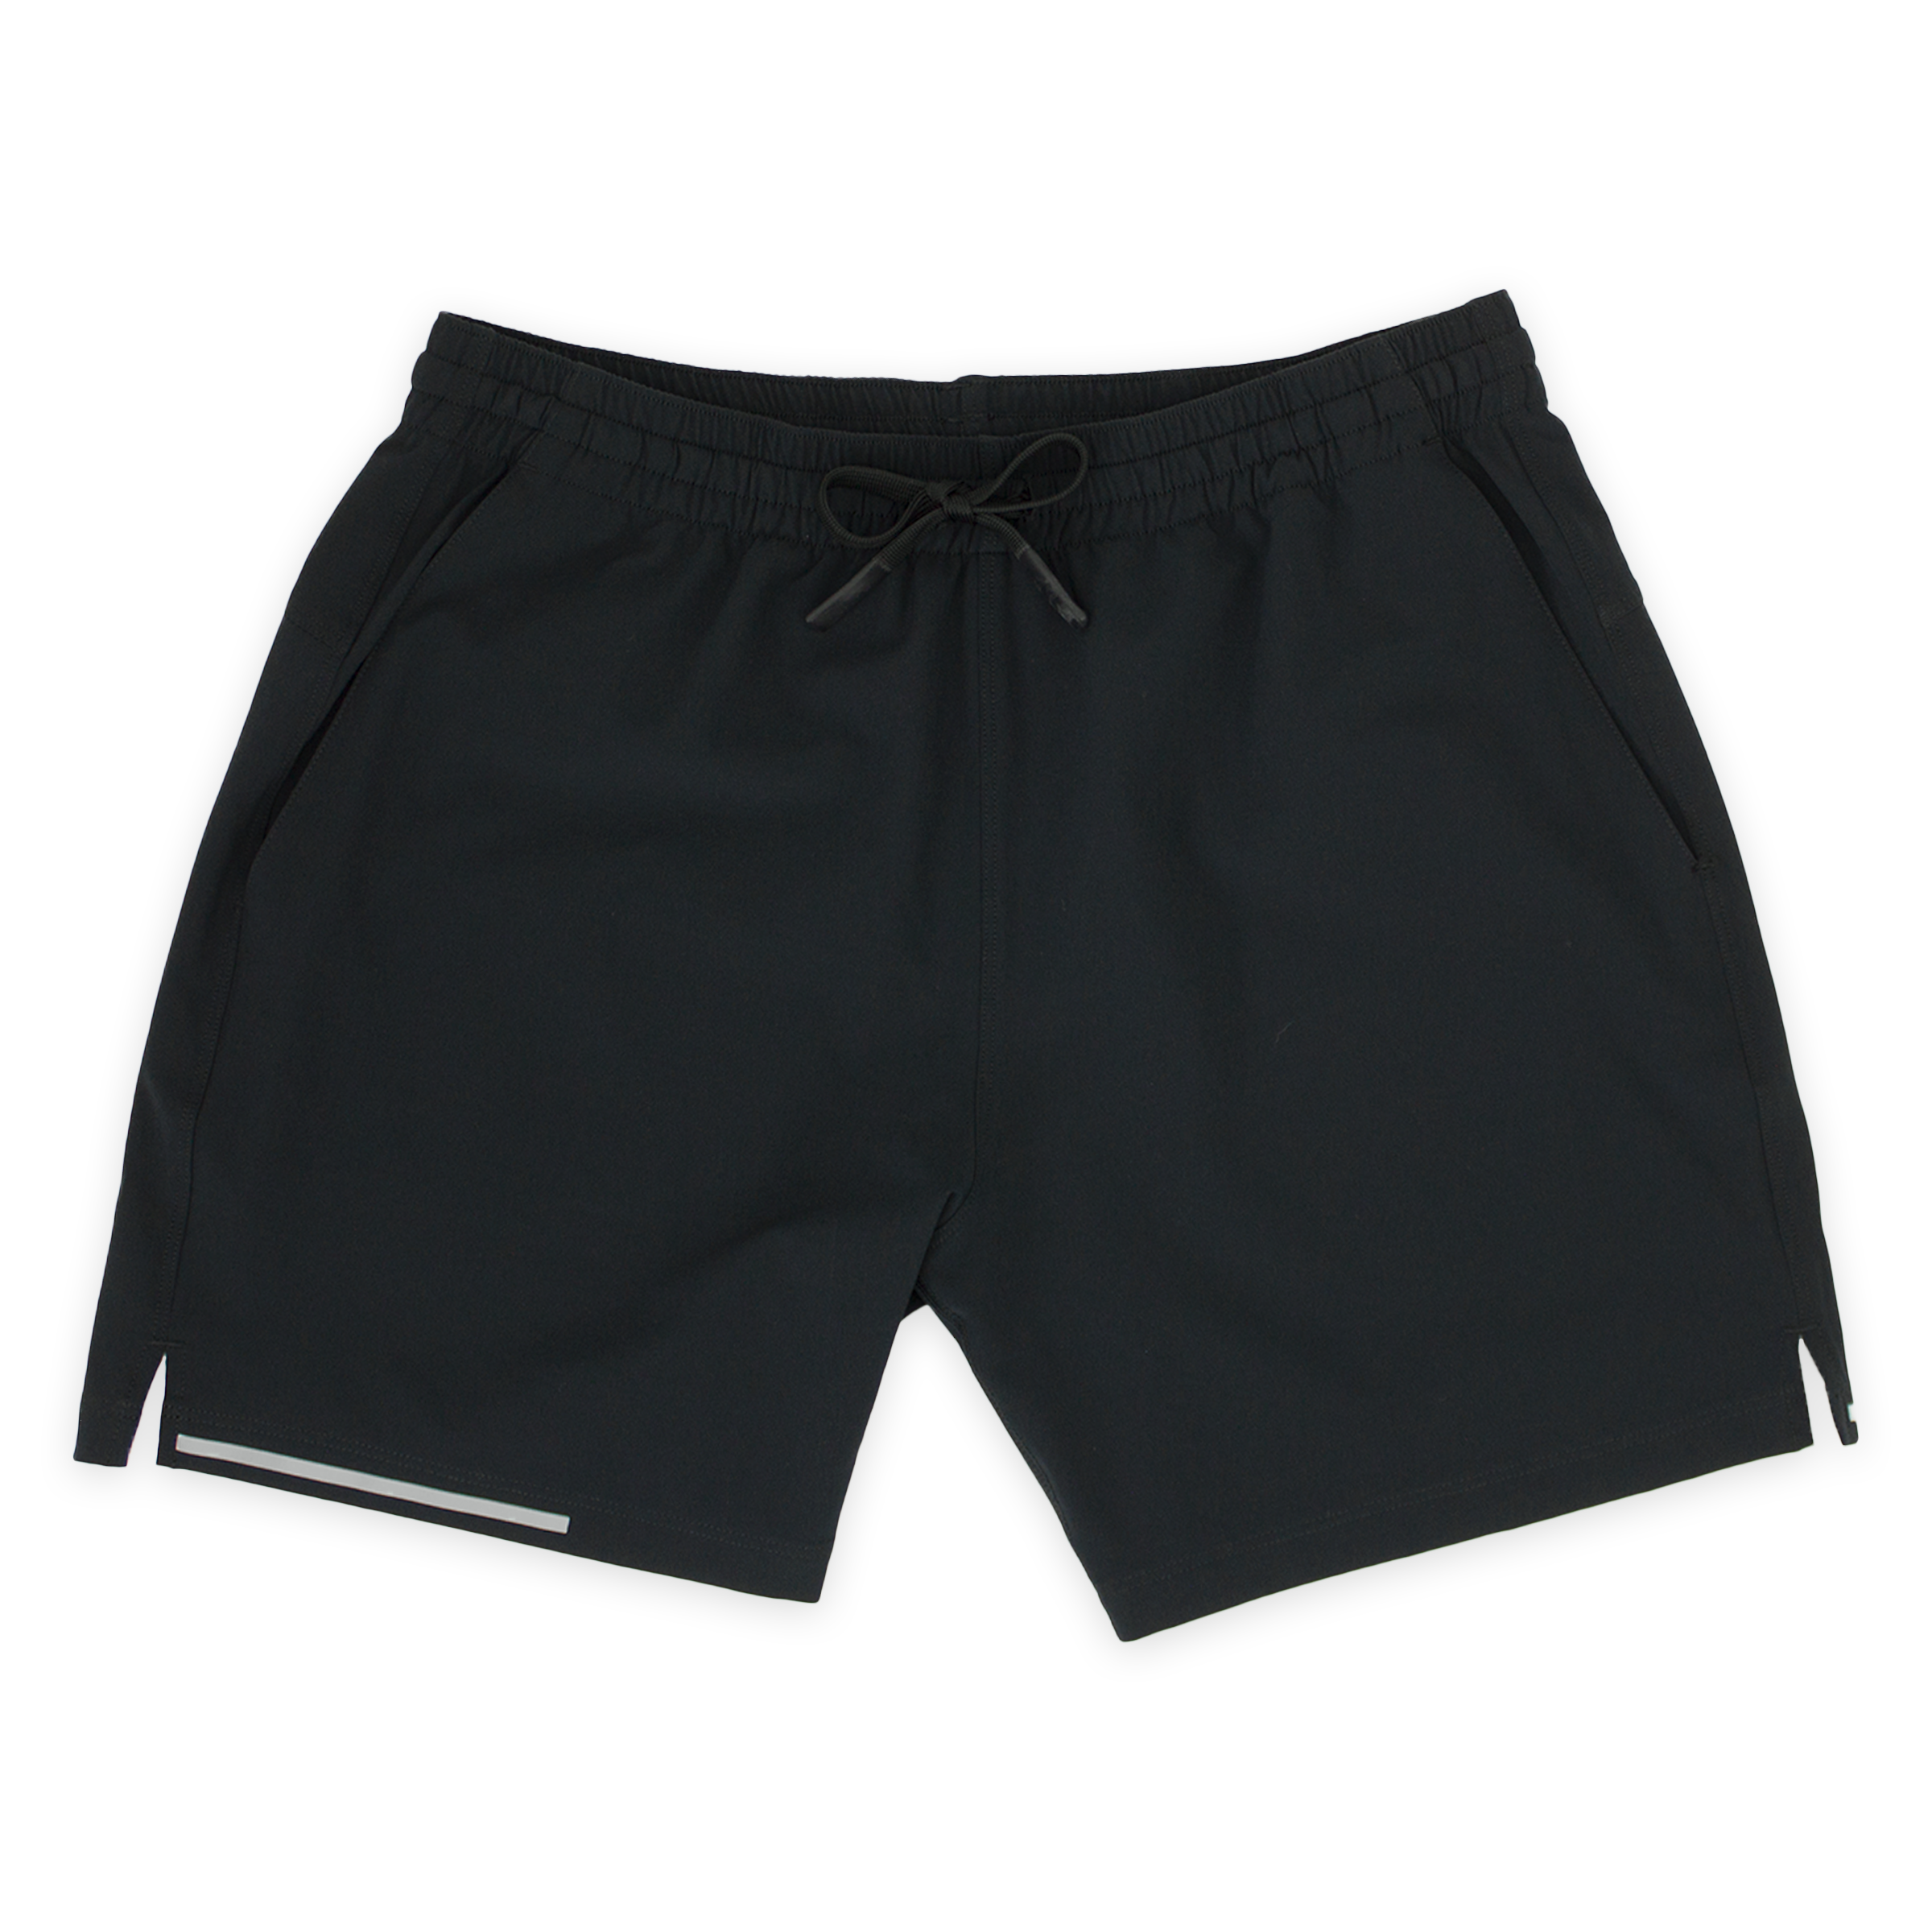 Run Short 5.5" Black front with elastic waistband, dyed-to-match drawstring with rubberized tips, two front pockets, split hem, and reflective line on bottom right hem